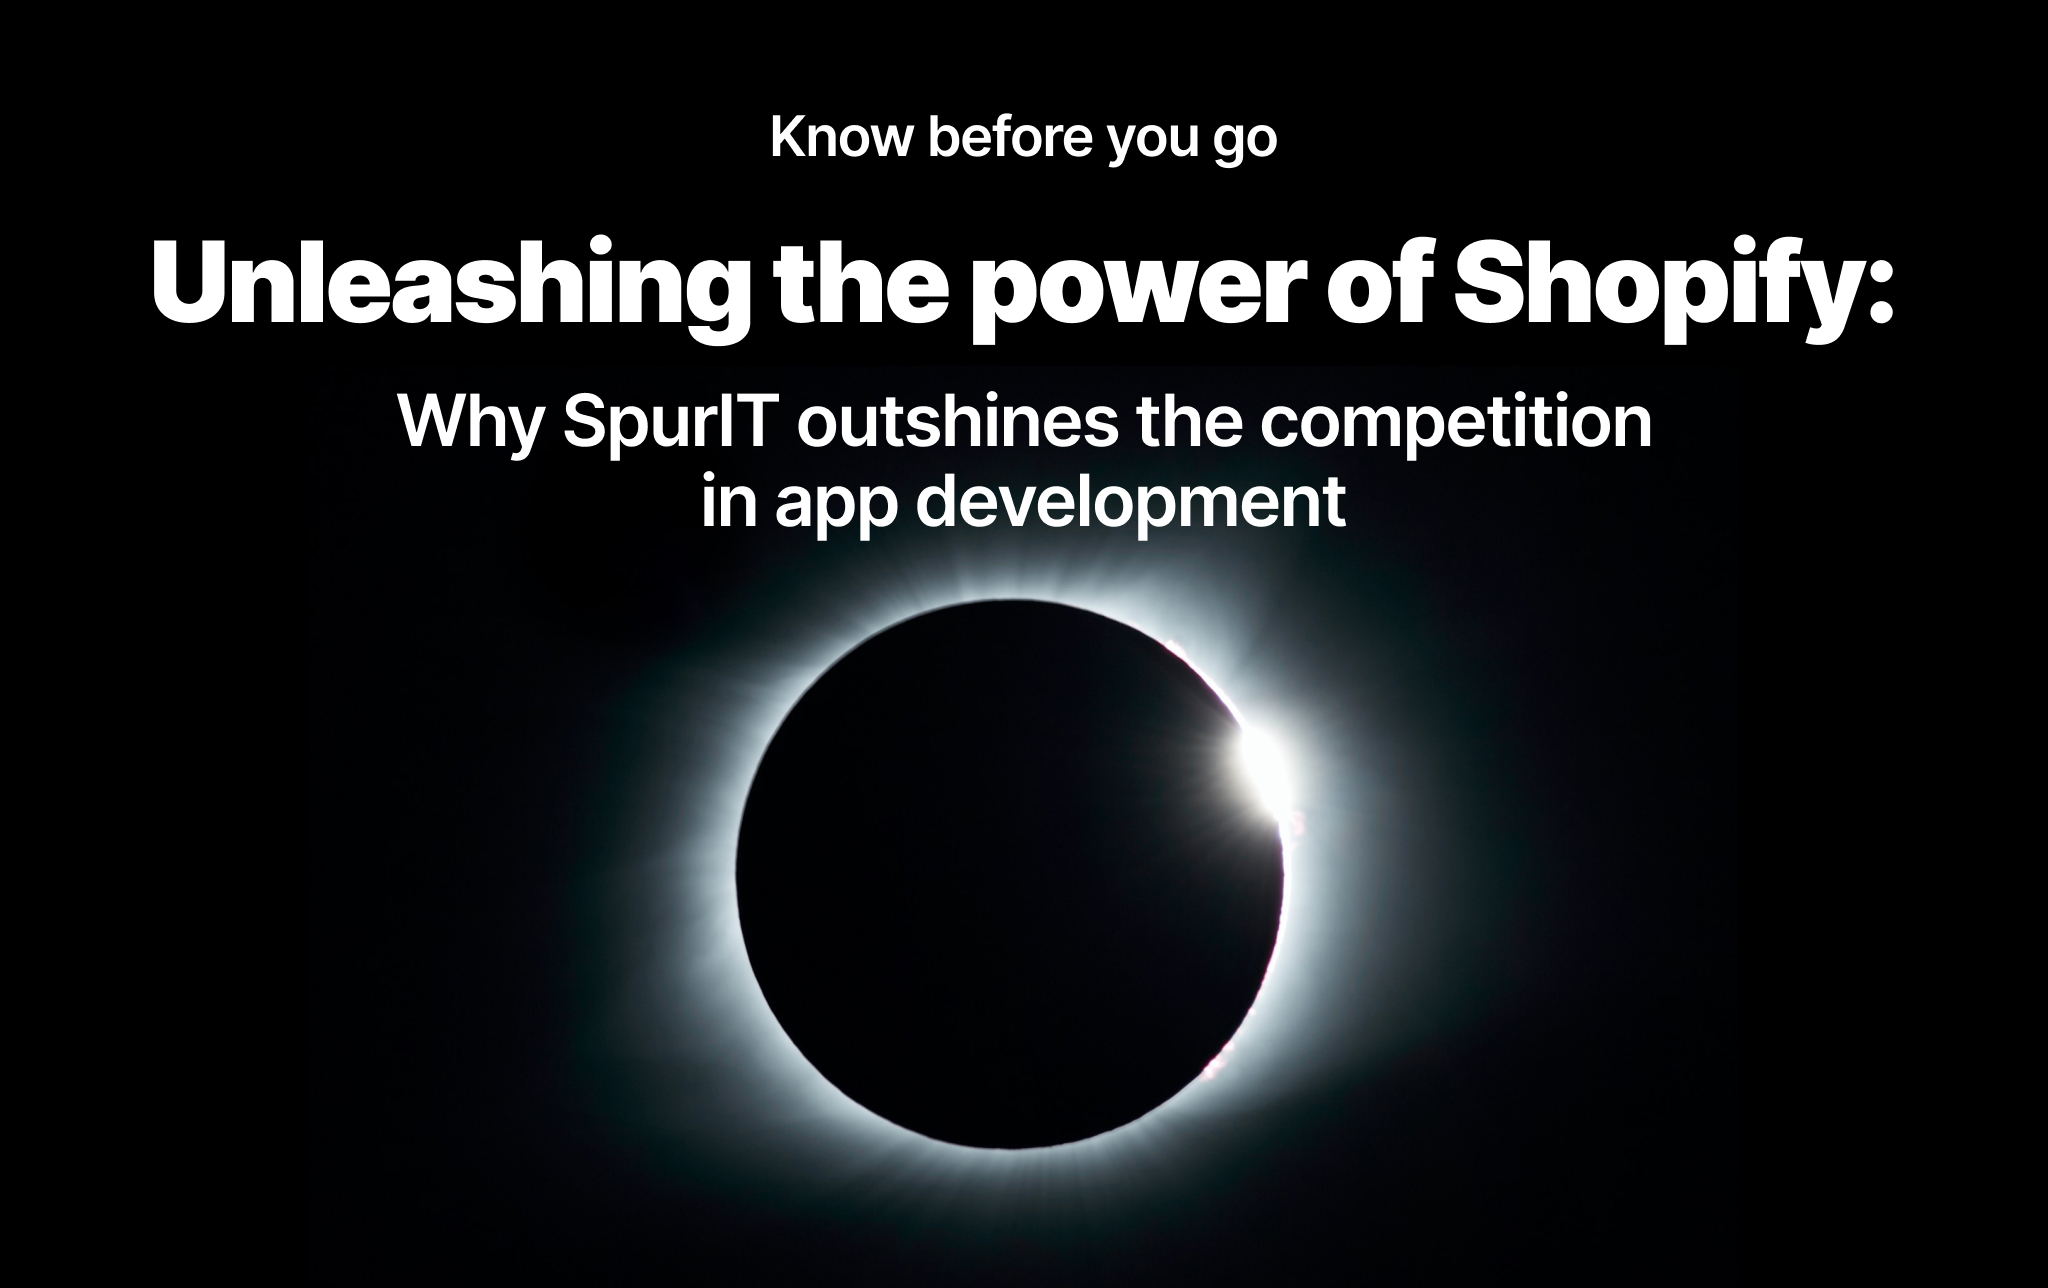 Unleashing the power of Shopify: Why SpurIT outshines the competition in app development